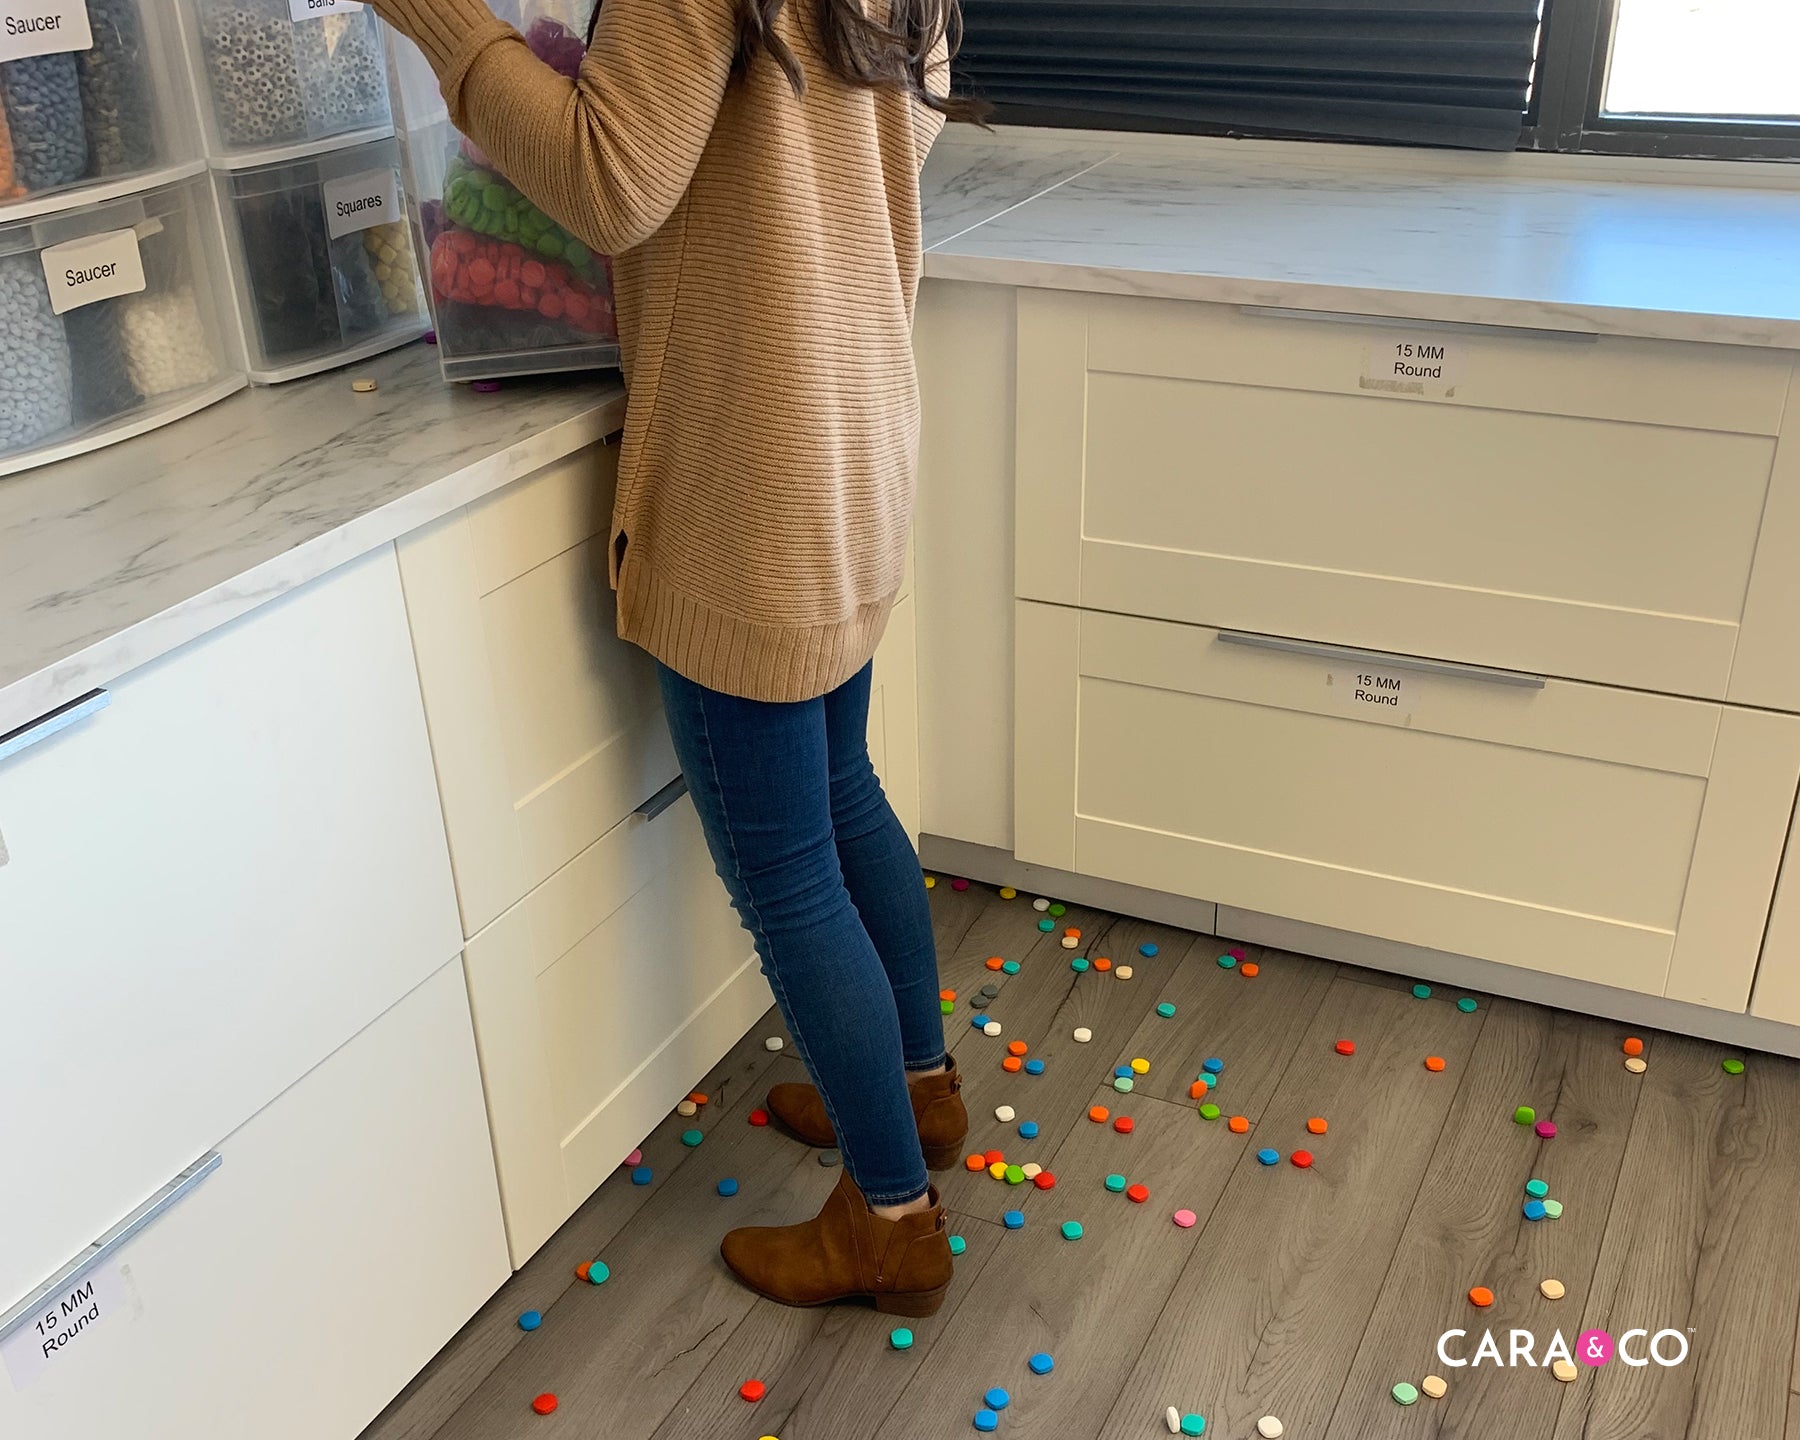 When the Beads Come Crashing Down: Our Story, Part 2 - Cara & Co Blog Posts